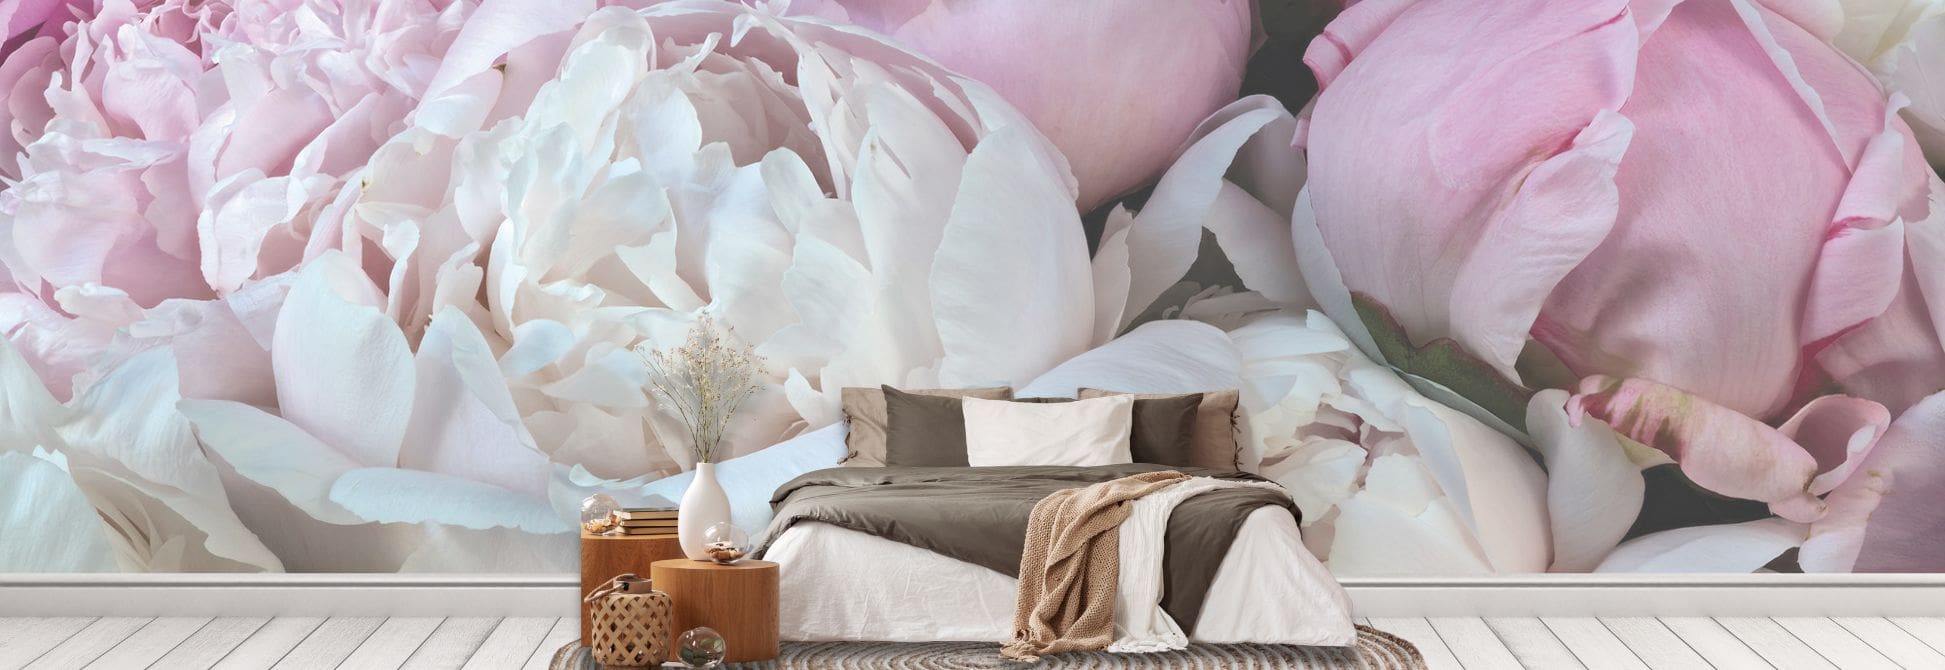 Shop Peony Flower Wallpaper, like this pink floral design on a bedroom wall, from About Murals.